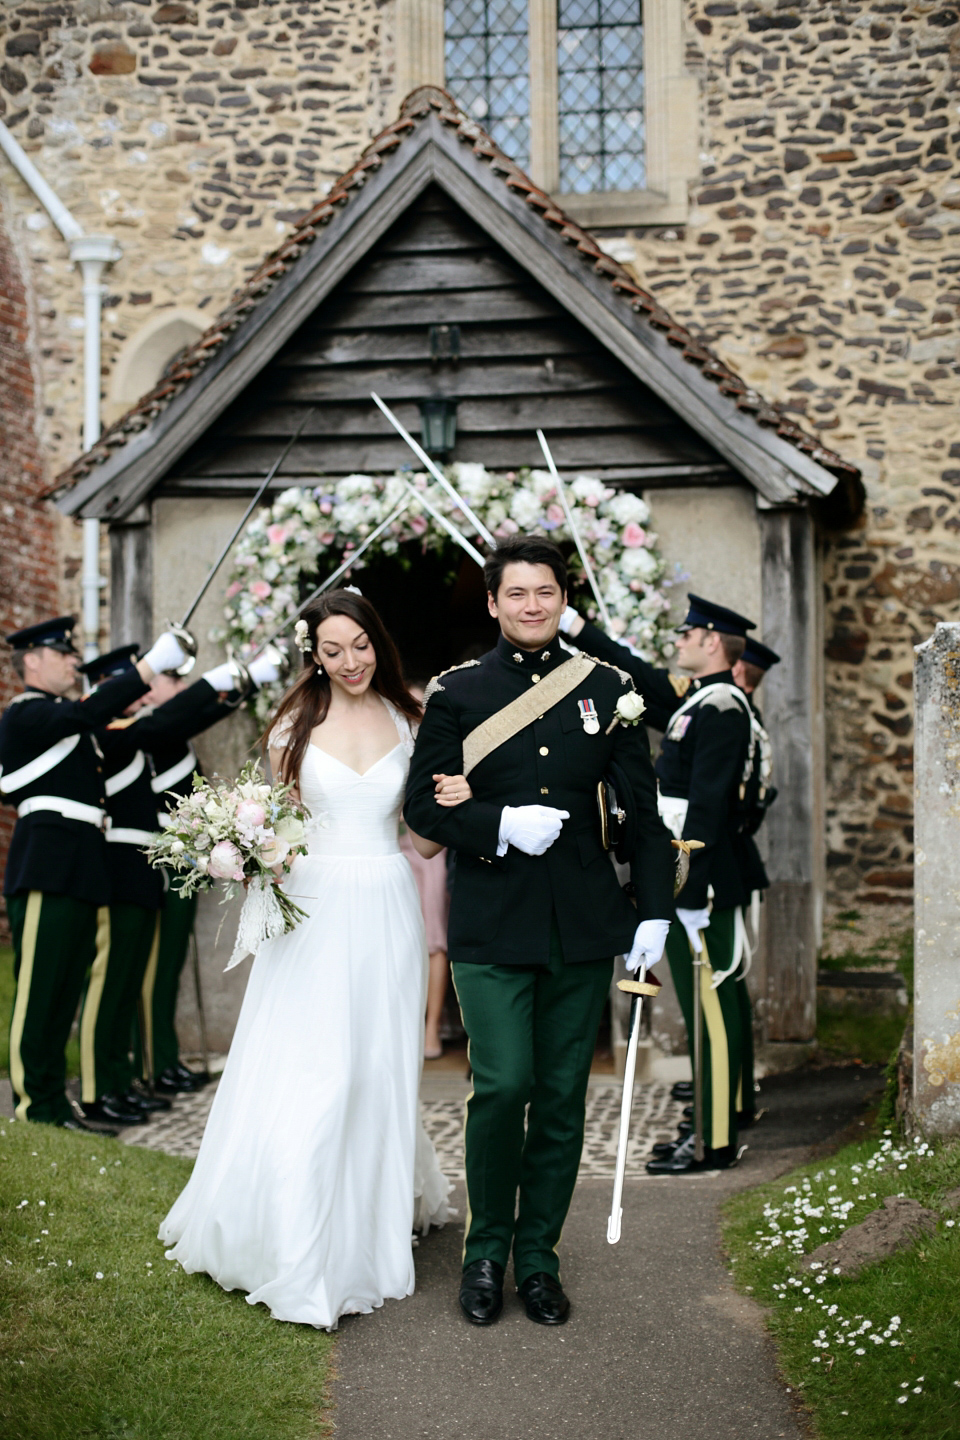 Bride Chloe wore a Suzanne Neville gown which she purchased from Miss Bush Bridal in Surrey, for her military style wedding in the English countryside. Photography by Dasha Caffrey.